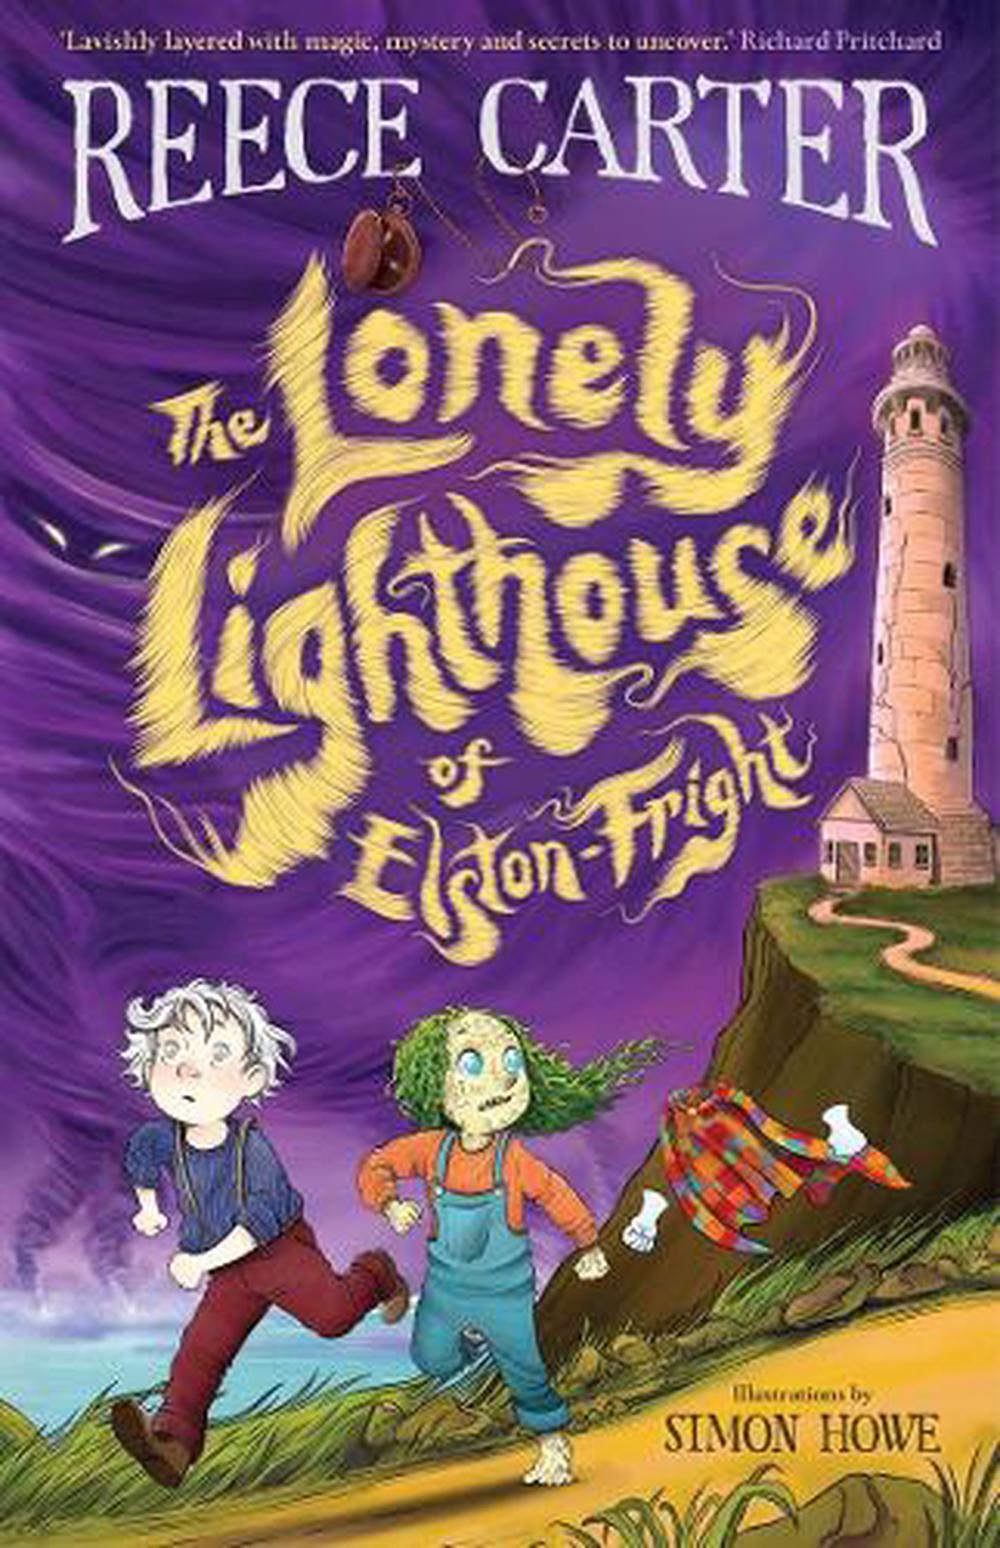 The Lonely Lighthouse Of Elston-fright: An Elston-fright Tale 2